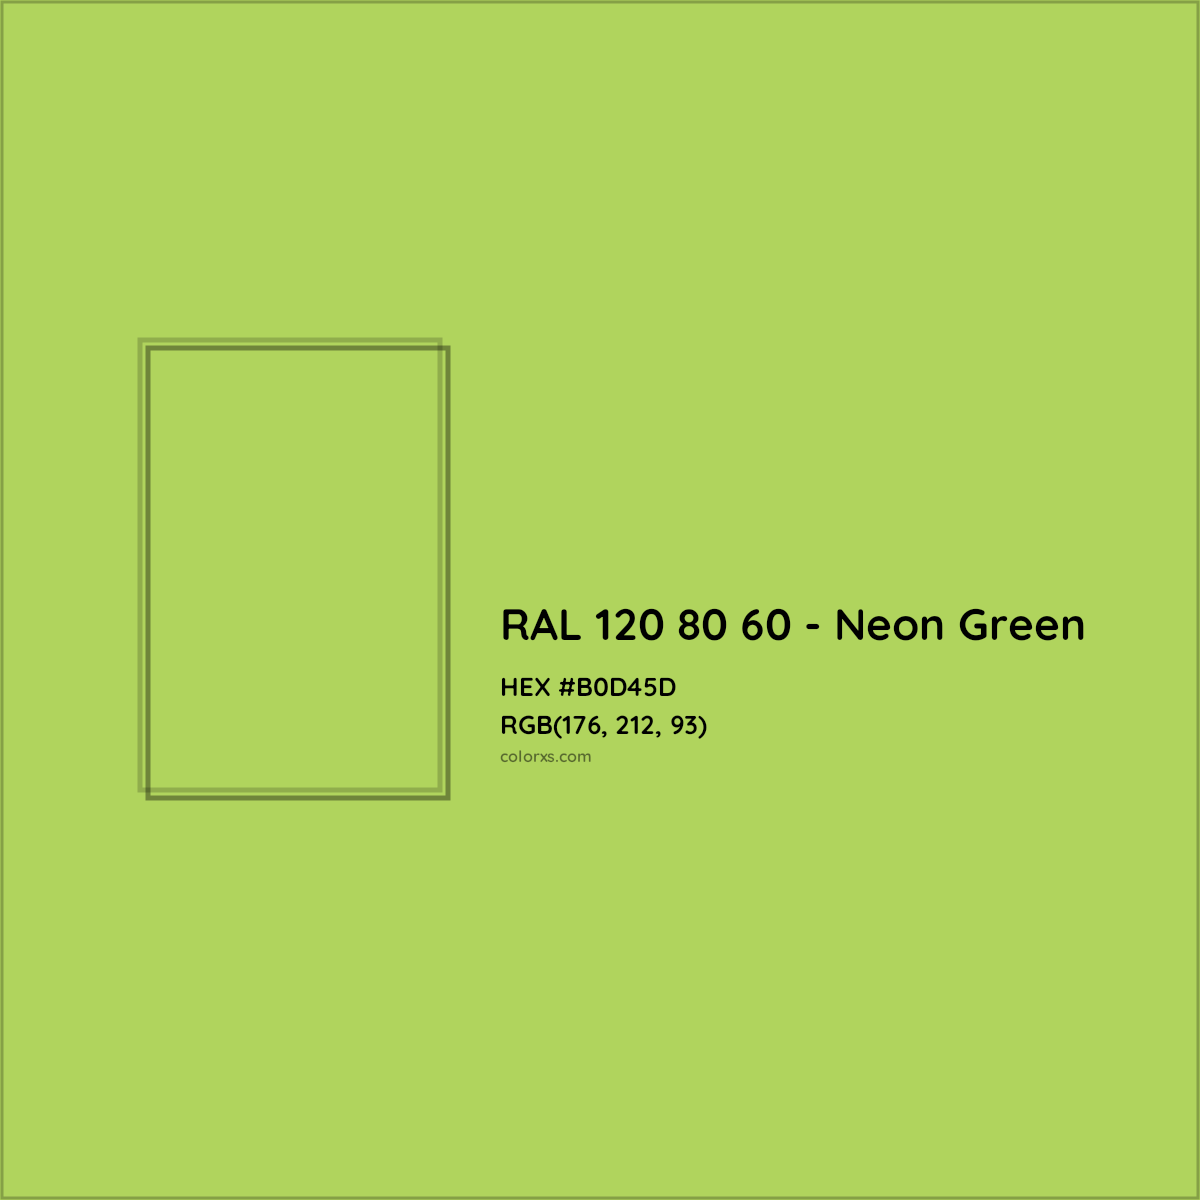 HEX #B0D45D RAL 120 80 60 - Neon Green CMS RAL Design - Color Code